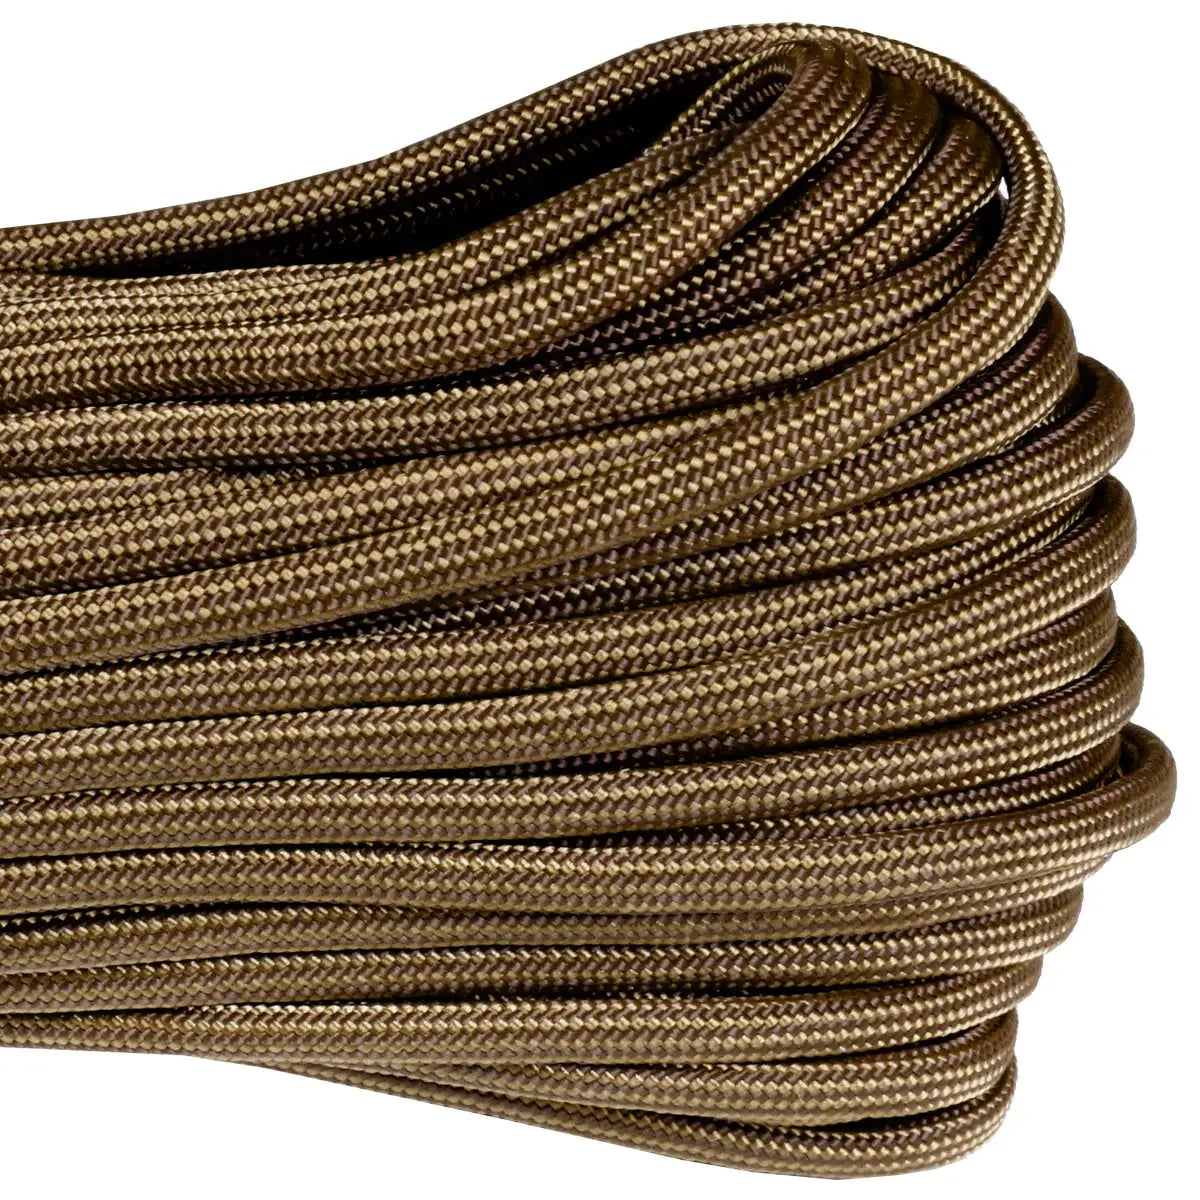 Coyote Brown - 50ft - 550 Paracord